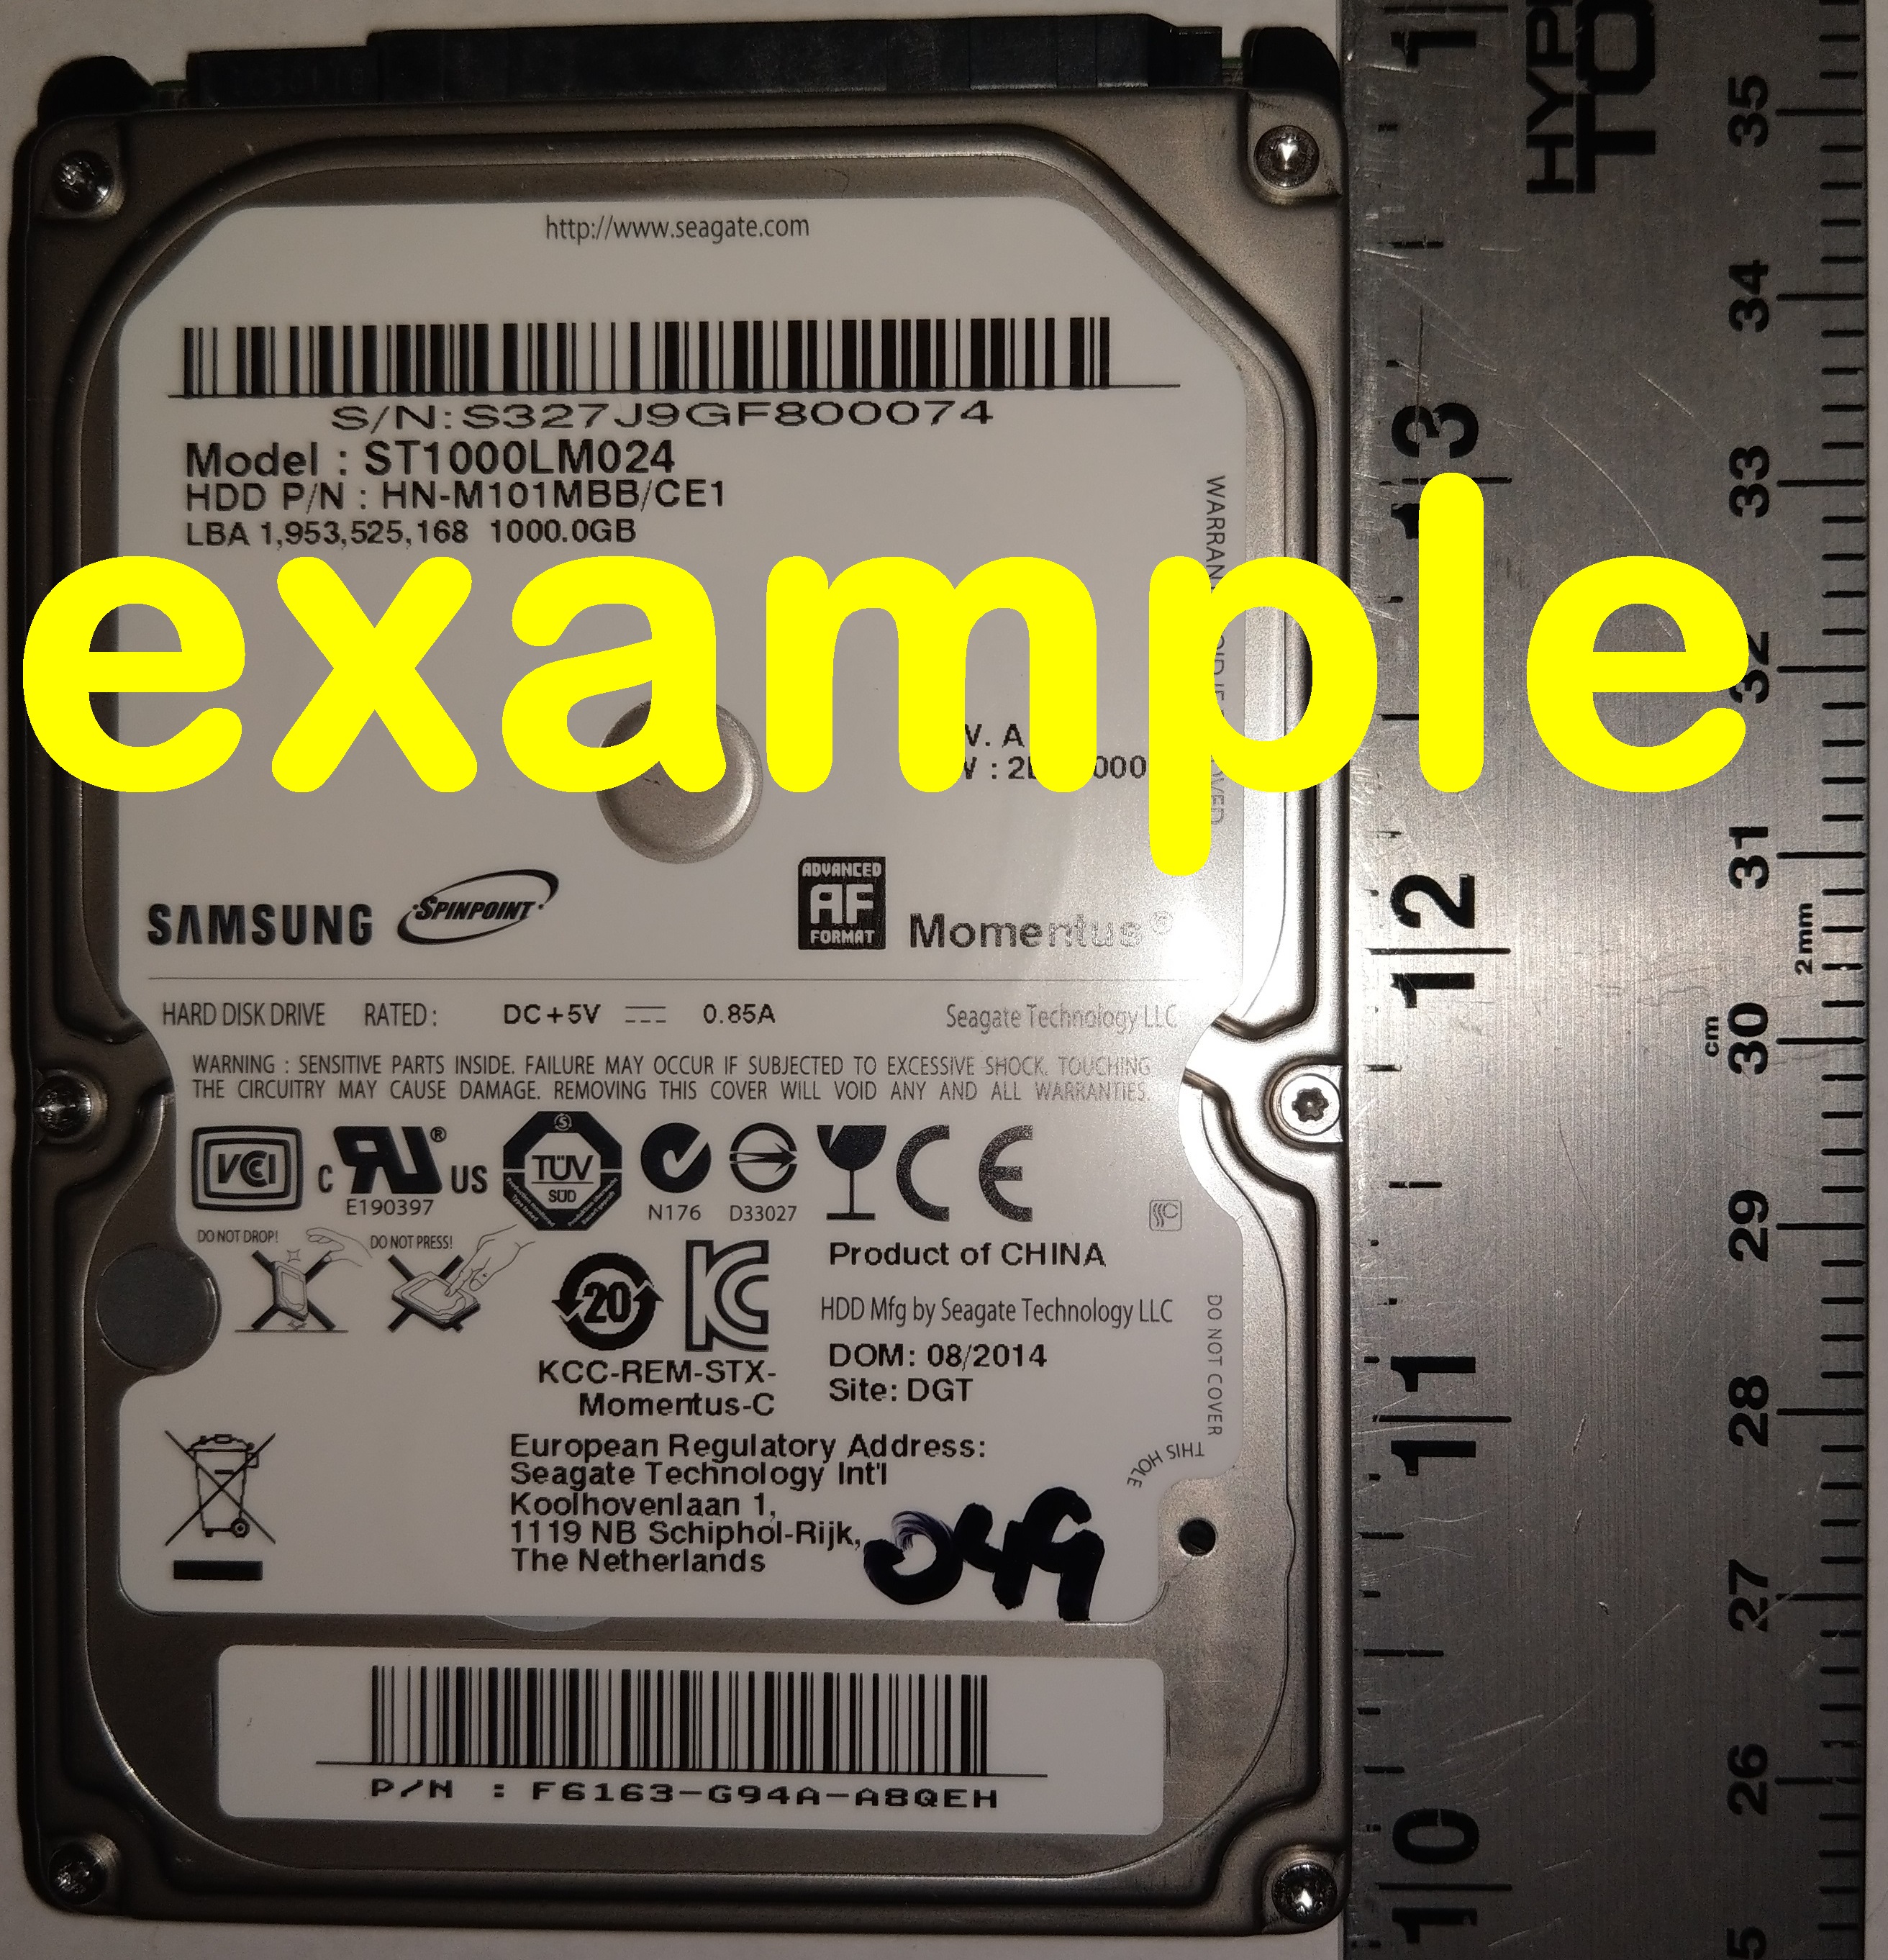 ForSale:HDD 1TB SATA-II(3Gb/s) laptop, 2.5inch, height=9.50mm; 8MB Cache, 5400rpm, Seagate ST1000LM024-HN-M101MBB $34.97 183723722073